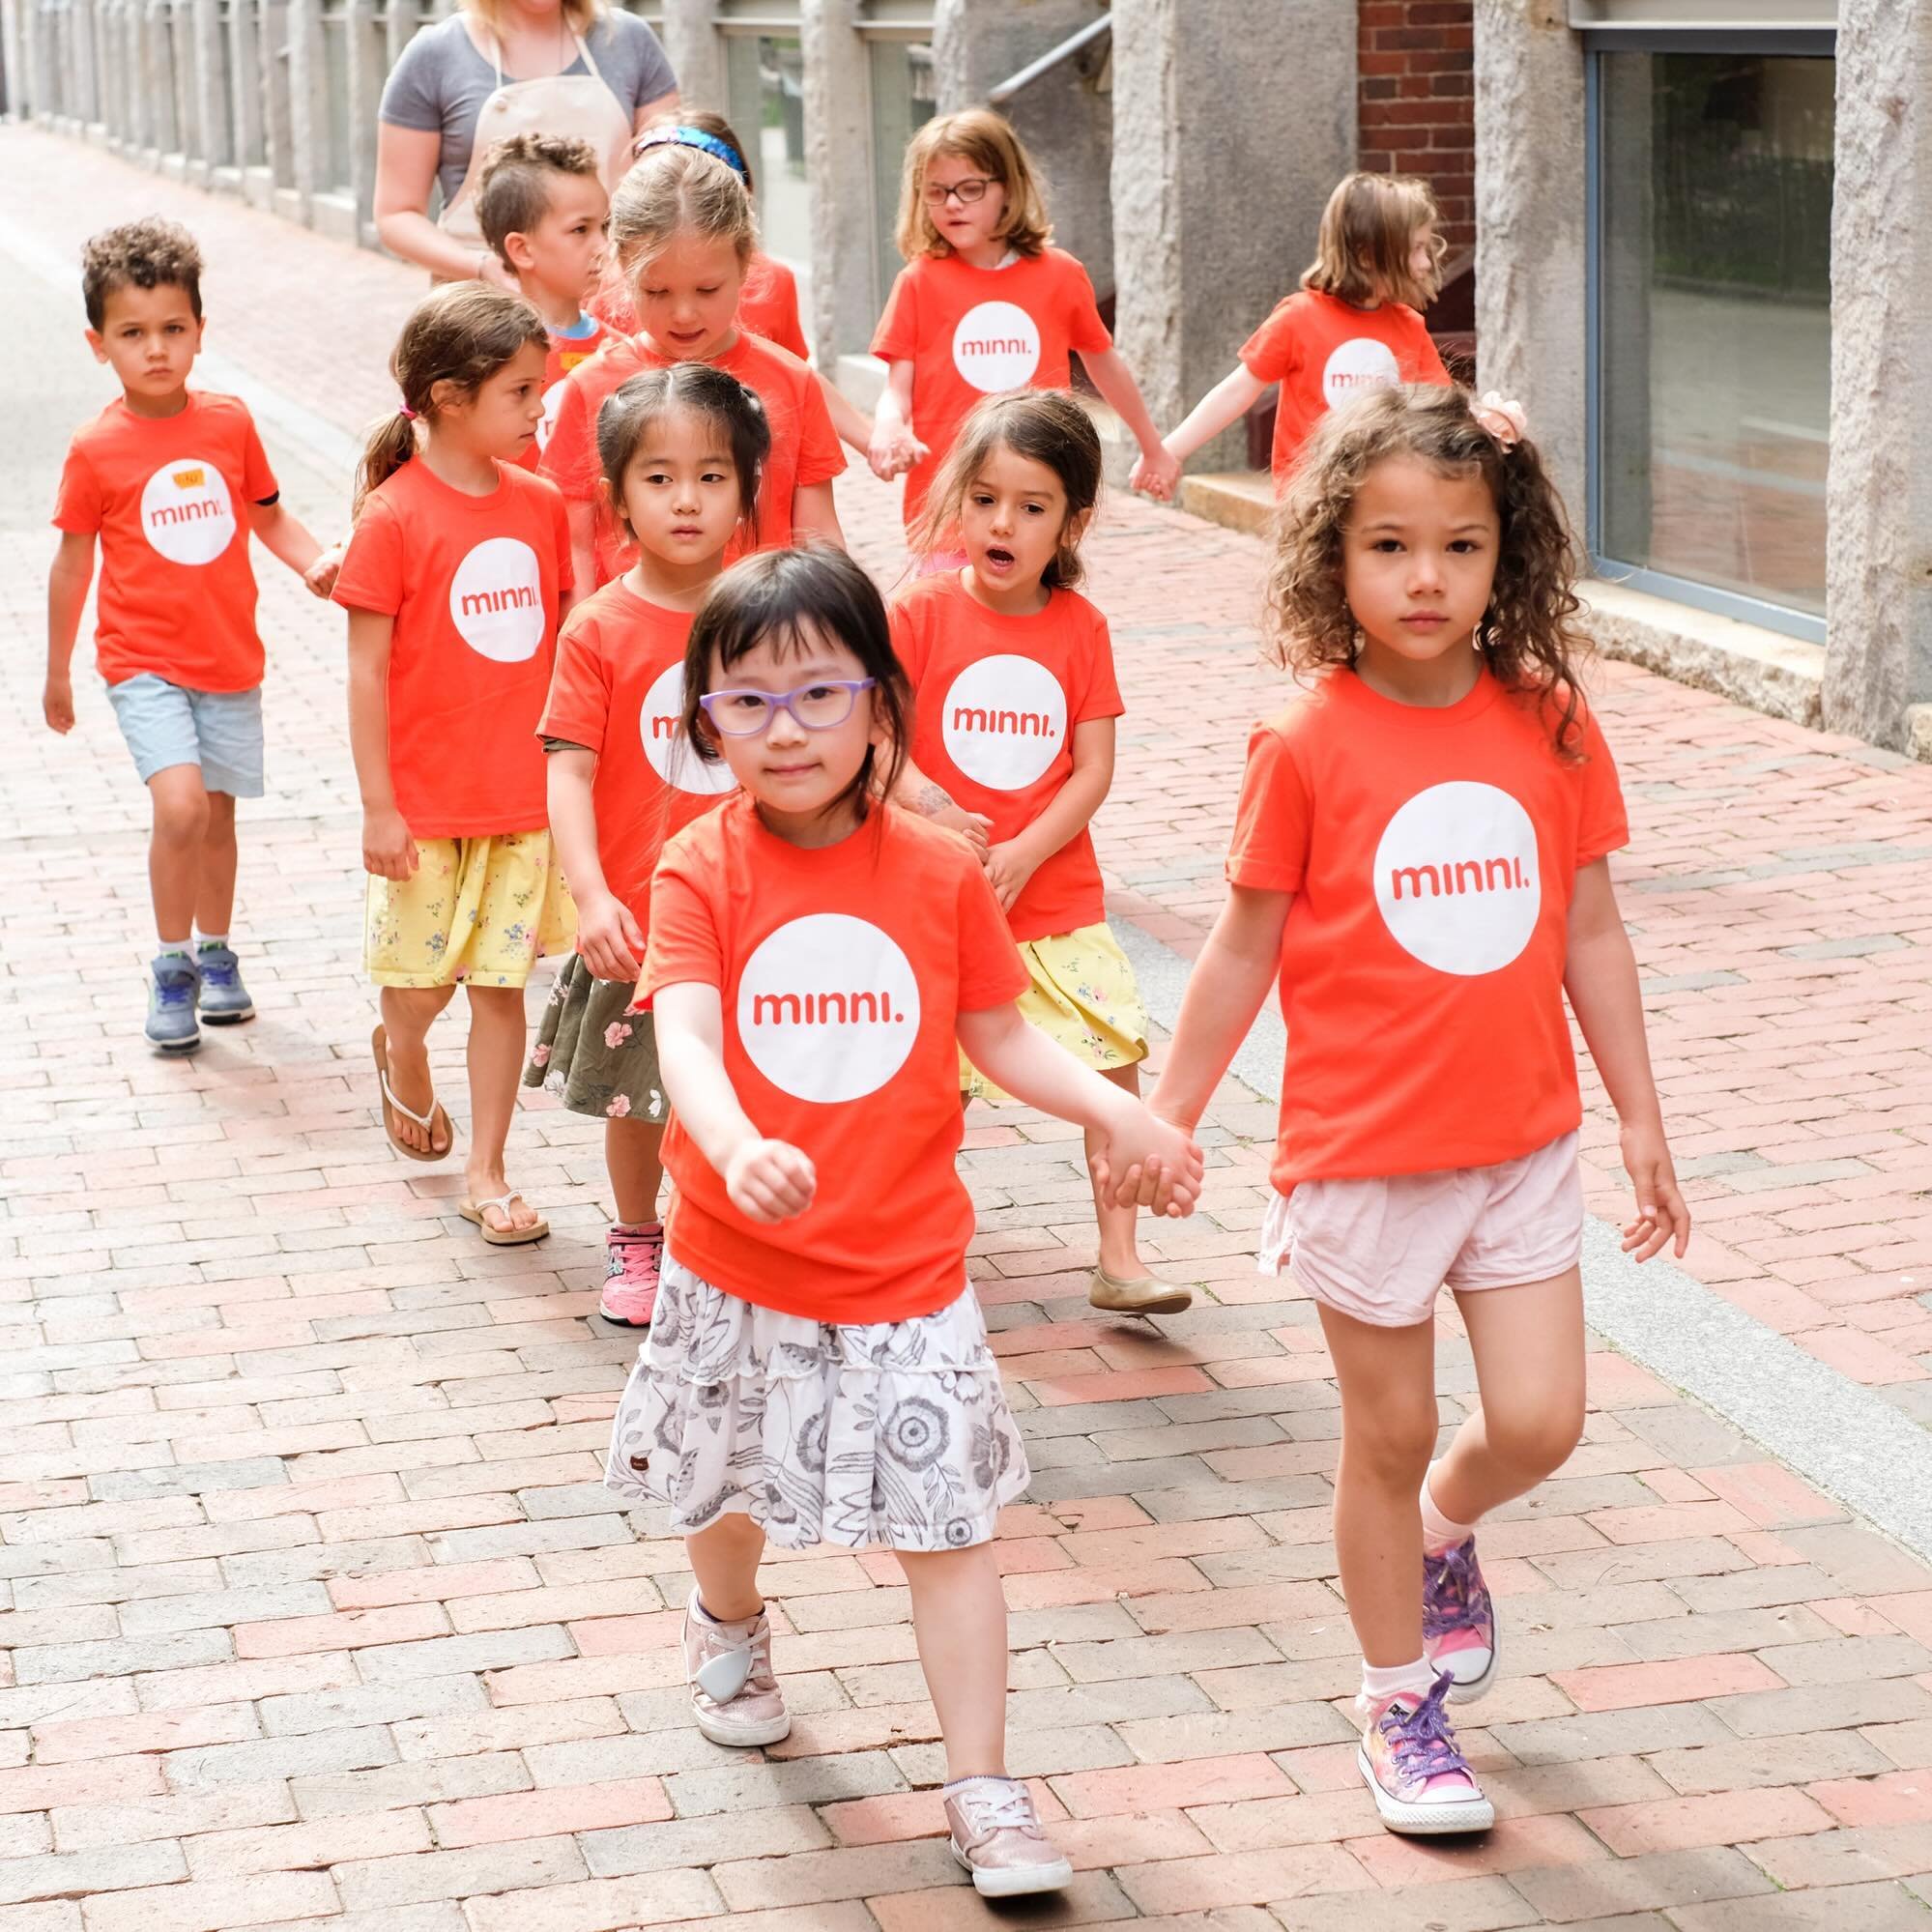 The sun is shining and it FEELS like summer here in Boston. We are getting all ready for our summer programming for little artists ages 4&ndash;10, beginning June 24 and running until August 30. There is still time &amp; space to sign up &amp; keep y